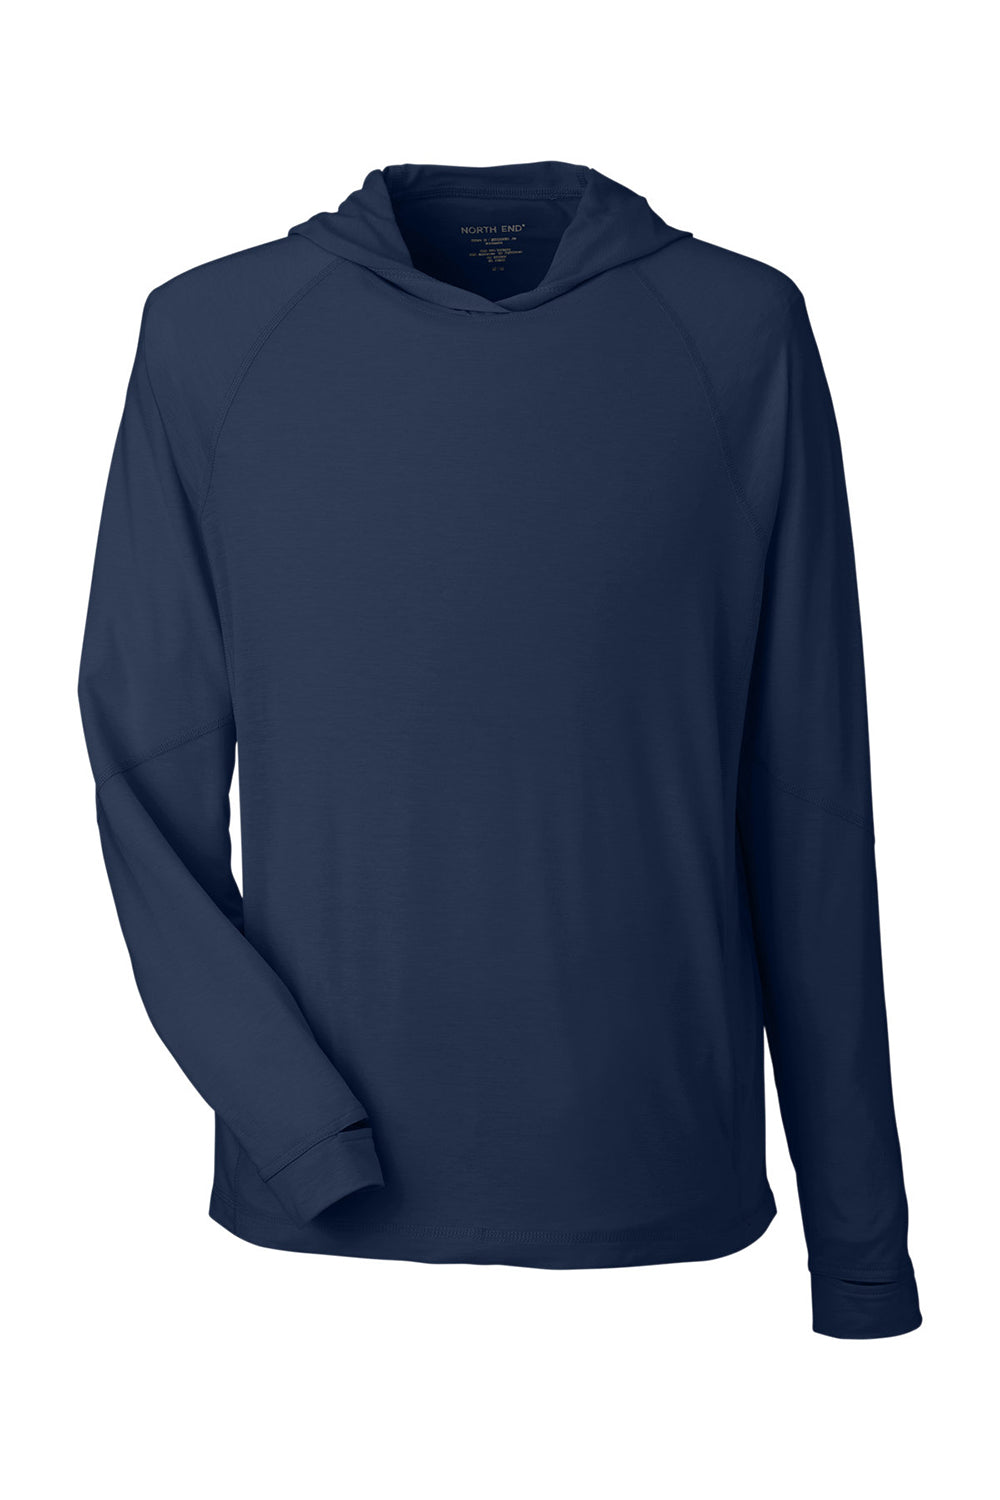 North End NE105 Mens Jaq Stretch Performance Hooded T-Shirt Hoodie Classic Navy Blue Flat Front